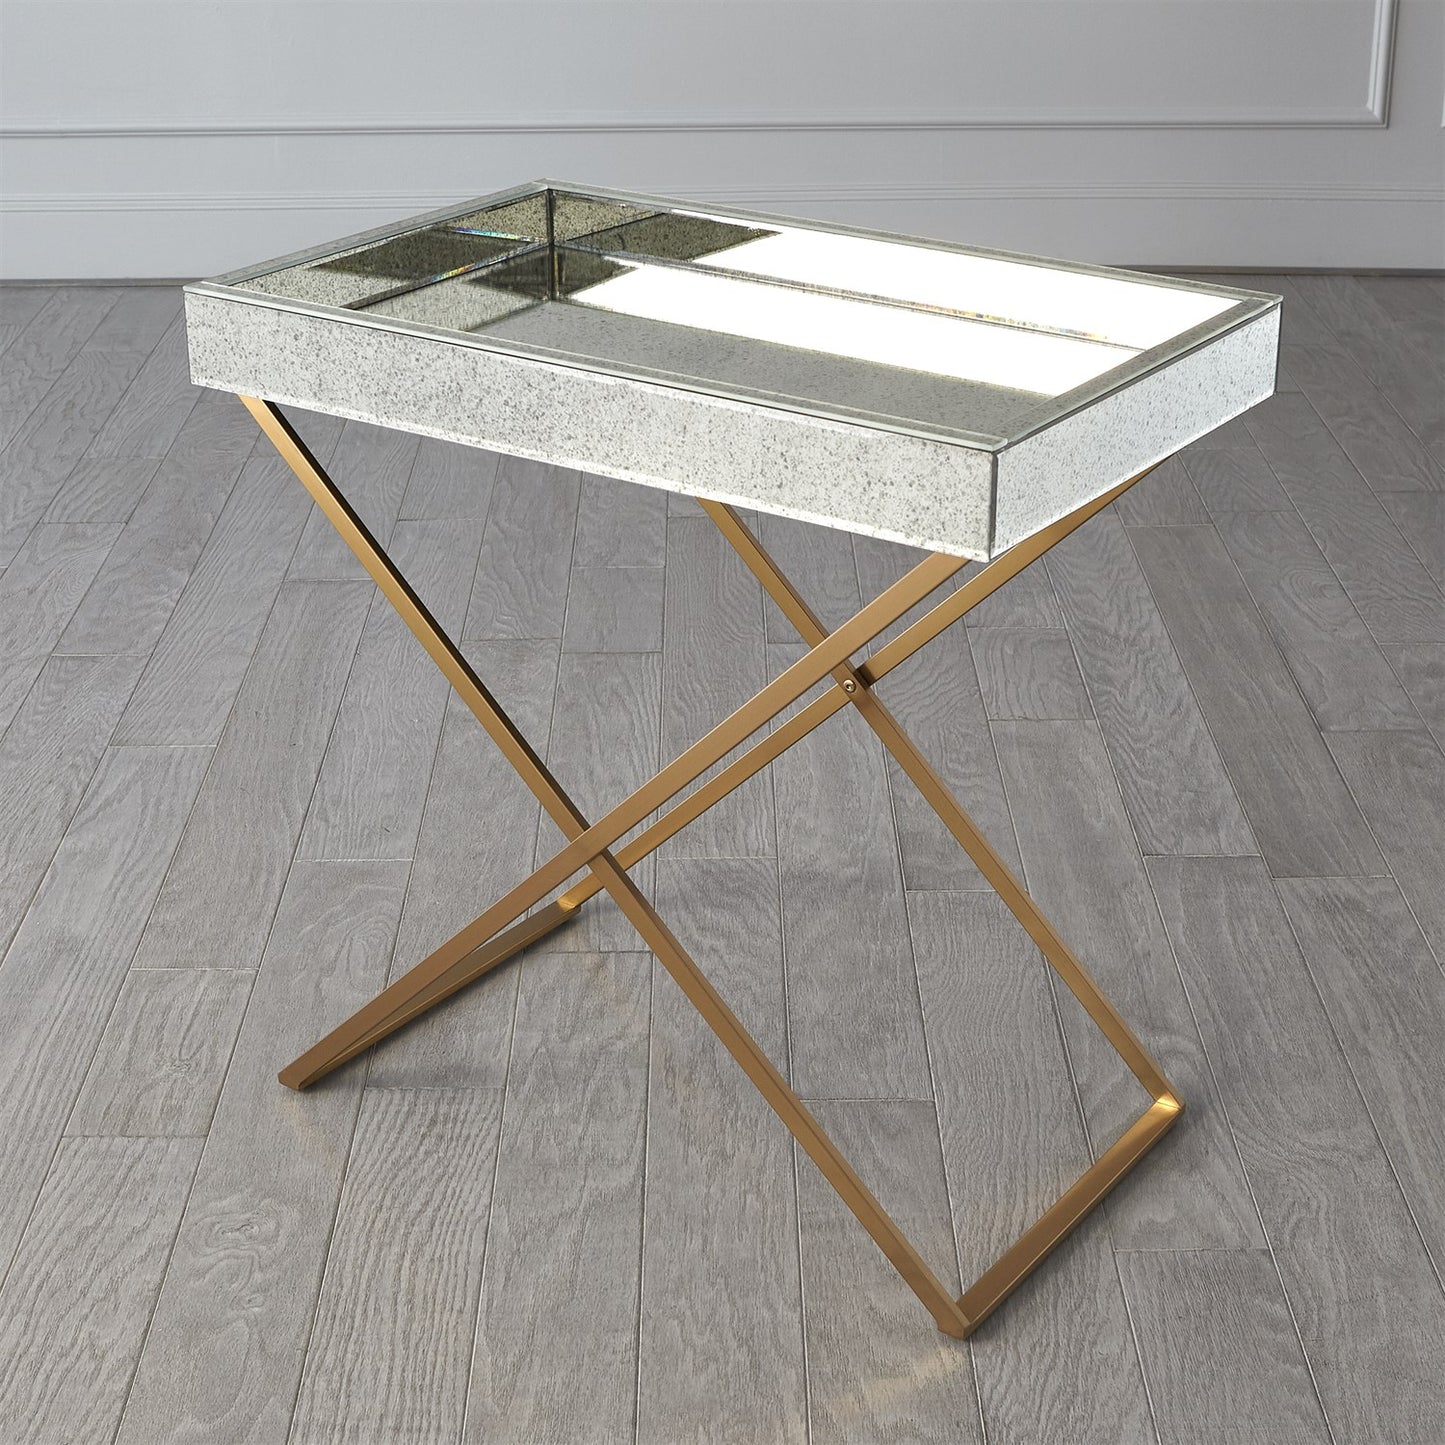 ANTIQUE MIRROR IN BRASS FOLDING TRAY TABLE